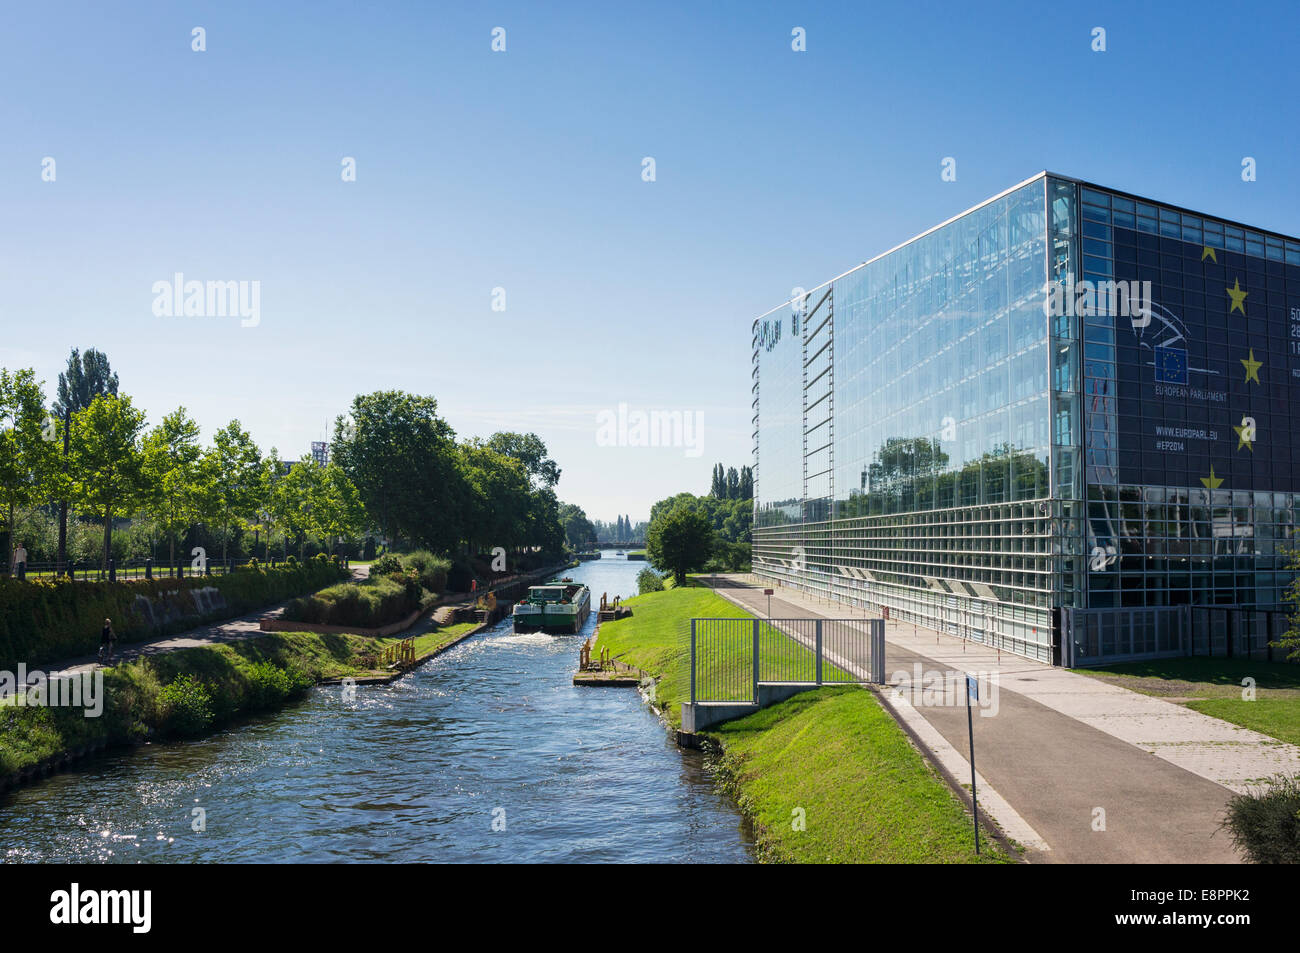 European Parliament building, Strasbourg, France, Europe and a tour boat on the River Ill Stock Photo